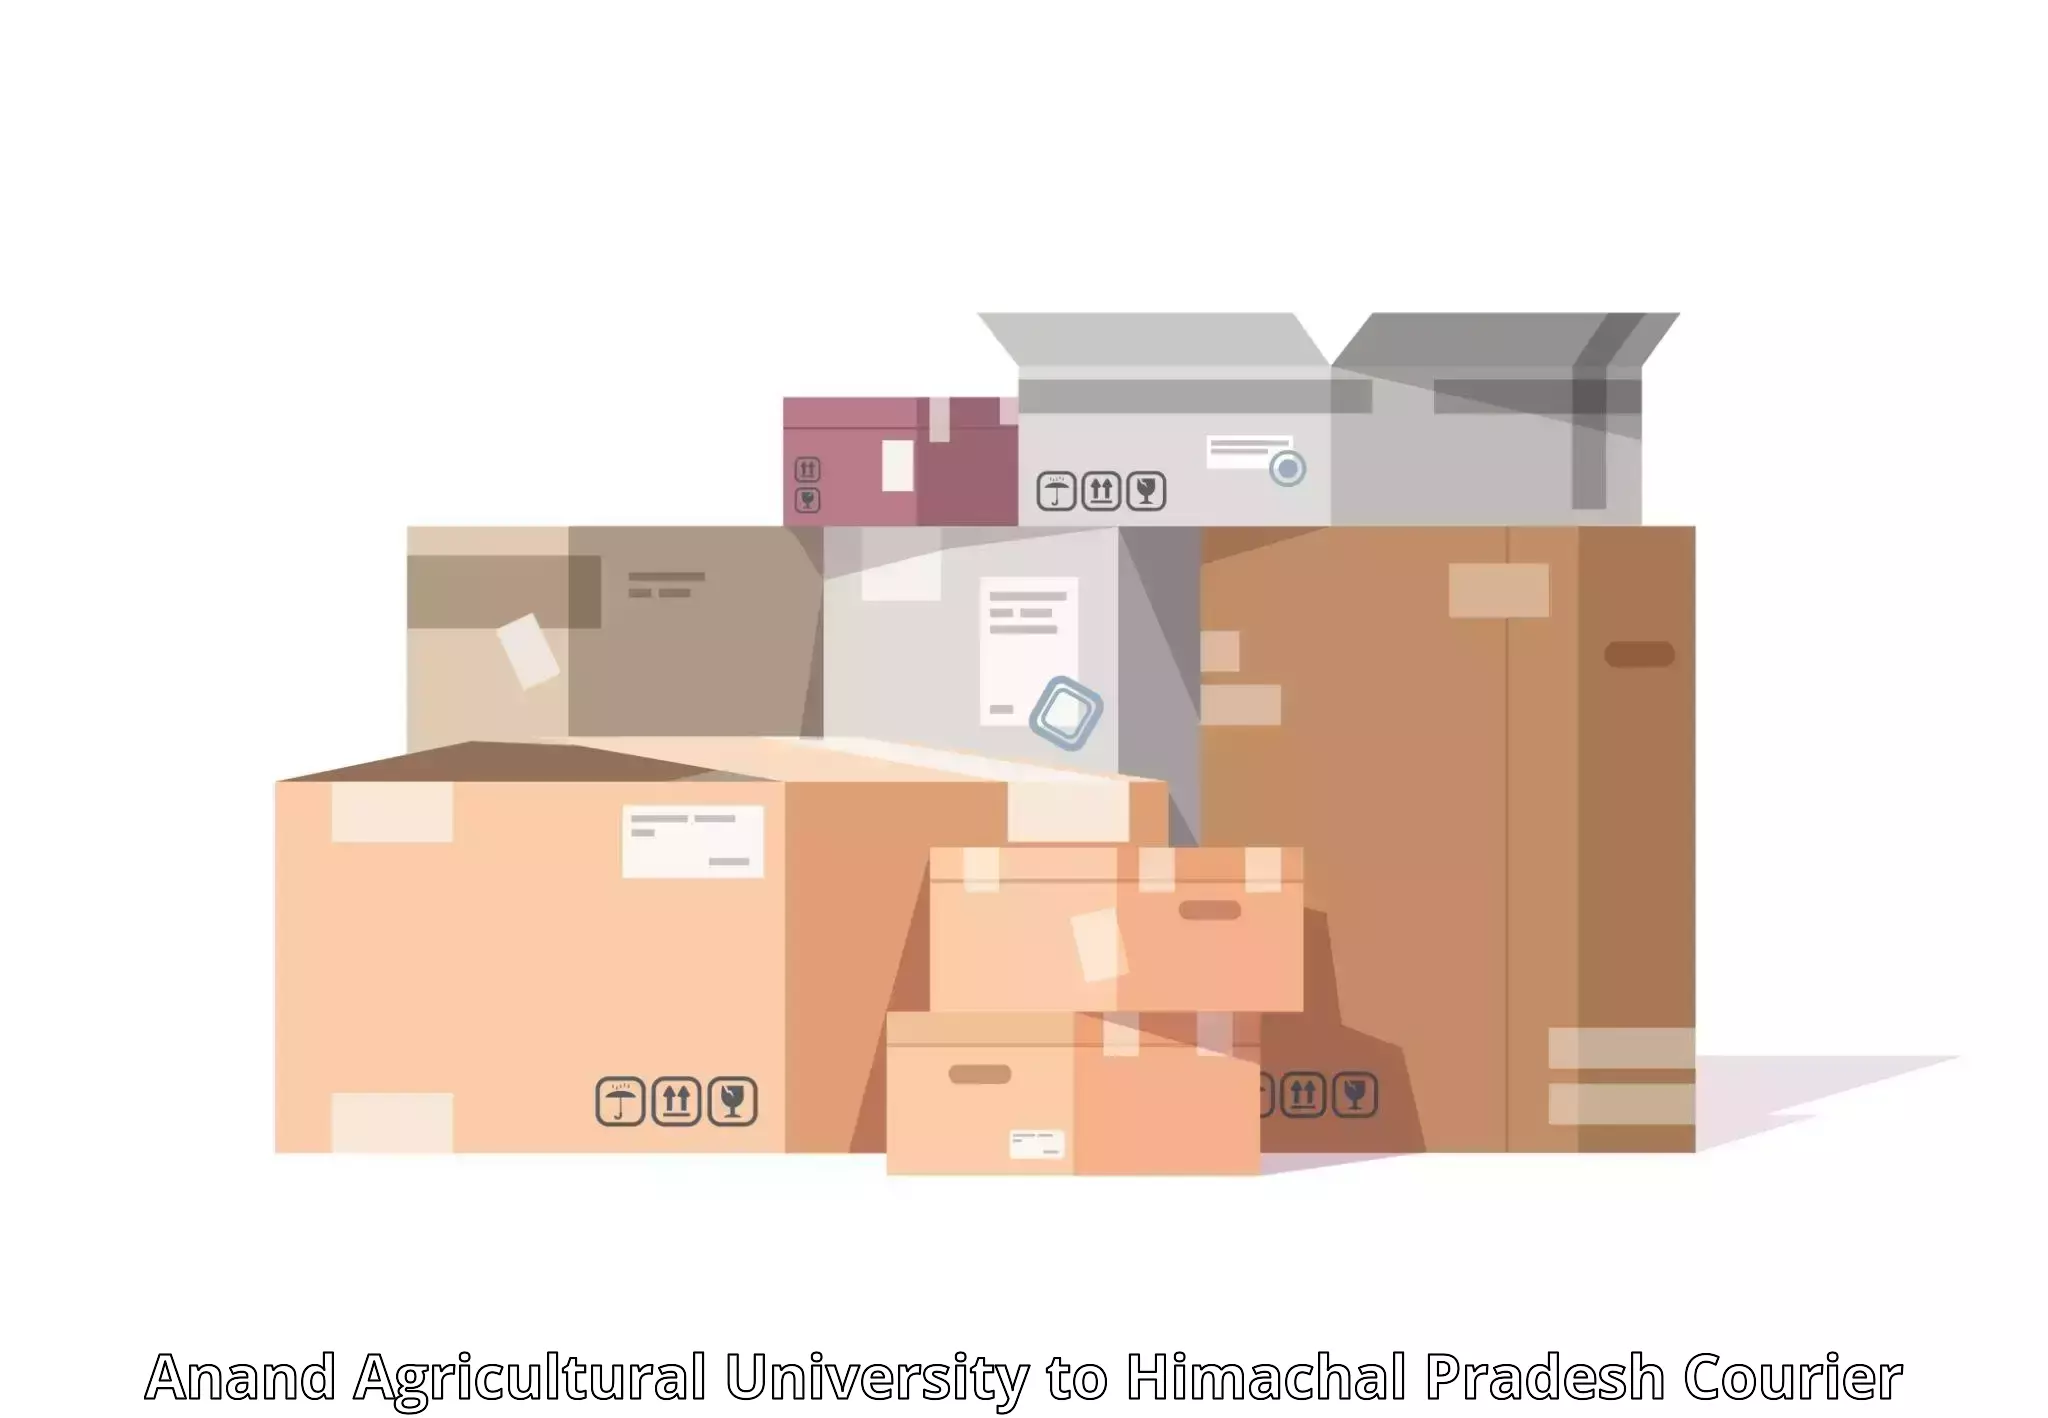 Cargo delivery service Anand Agricultural University to Dulchehra